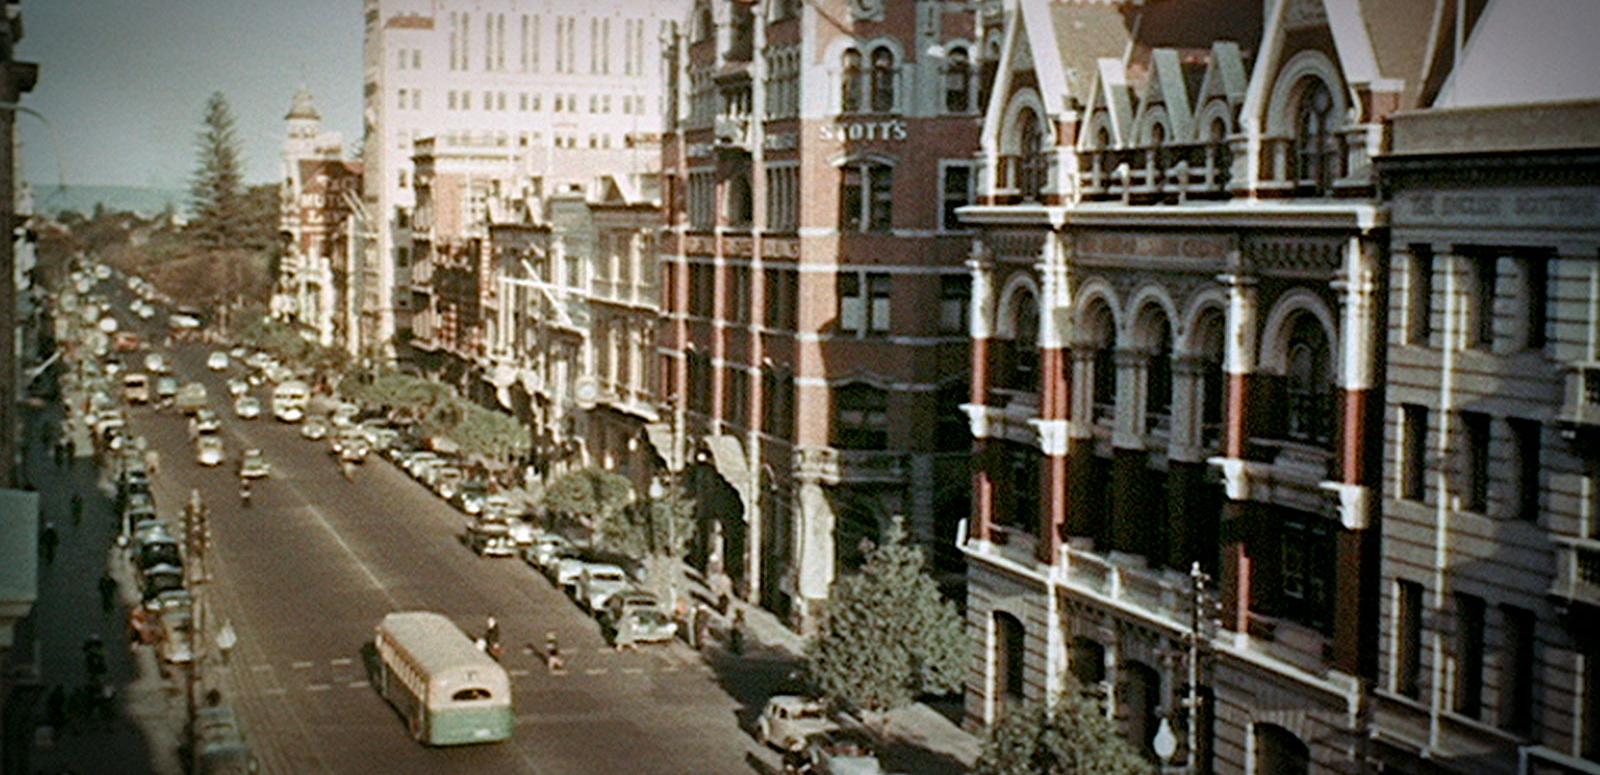 A street scene from Perth circa 1954. The street is lined with 3 and 4 story buildings and there are many cars parked on the side of the road, there are trees along the footpaths and a few pedestrians can be seen crossing the street.